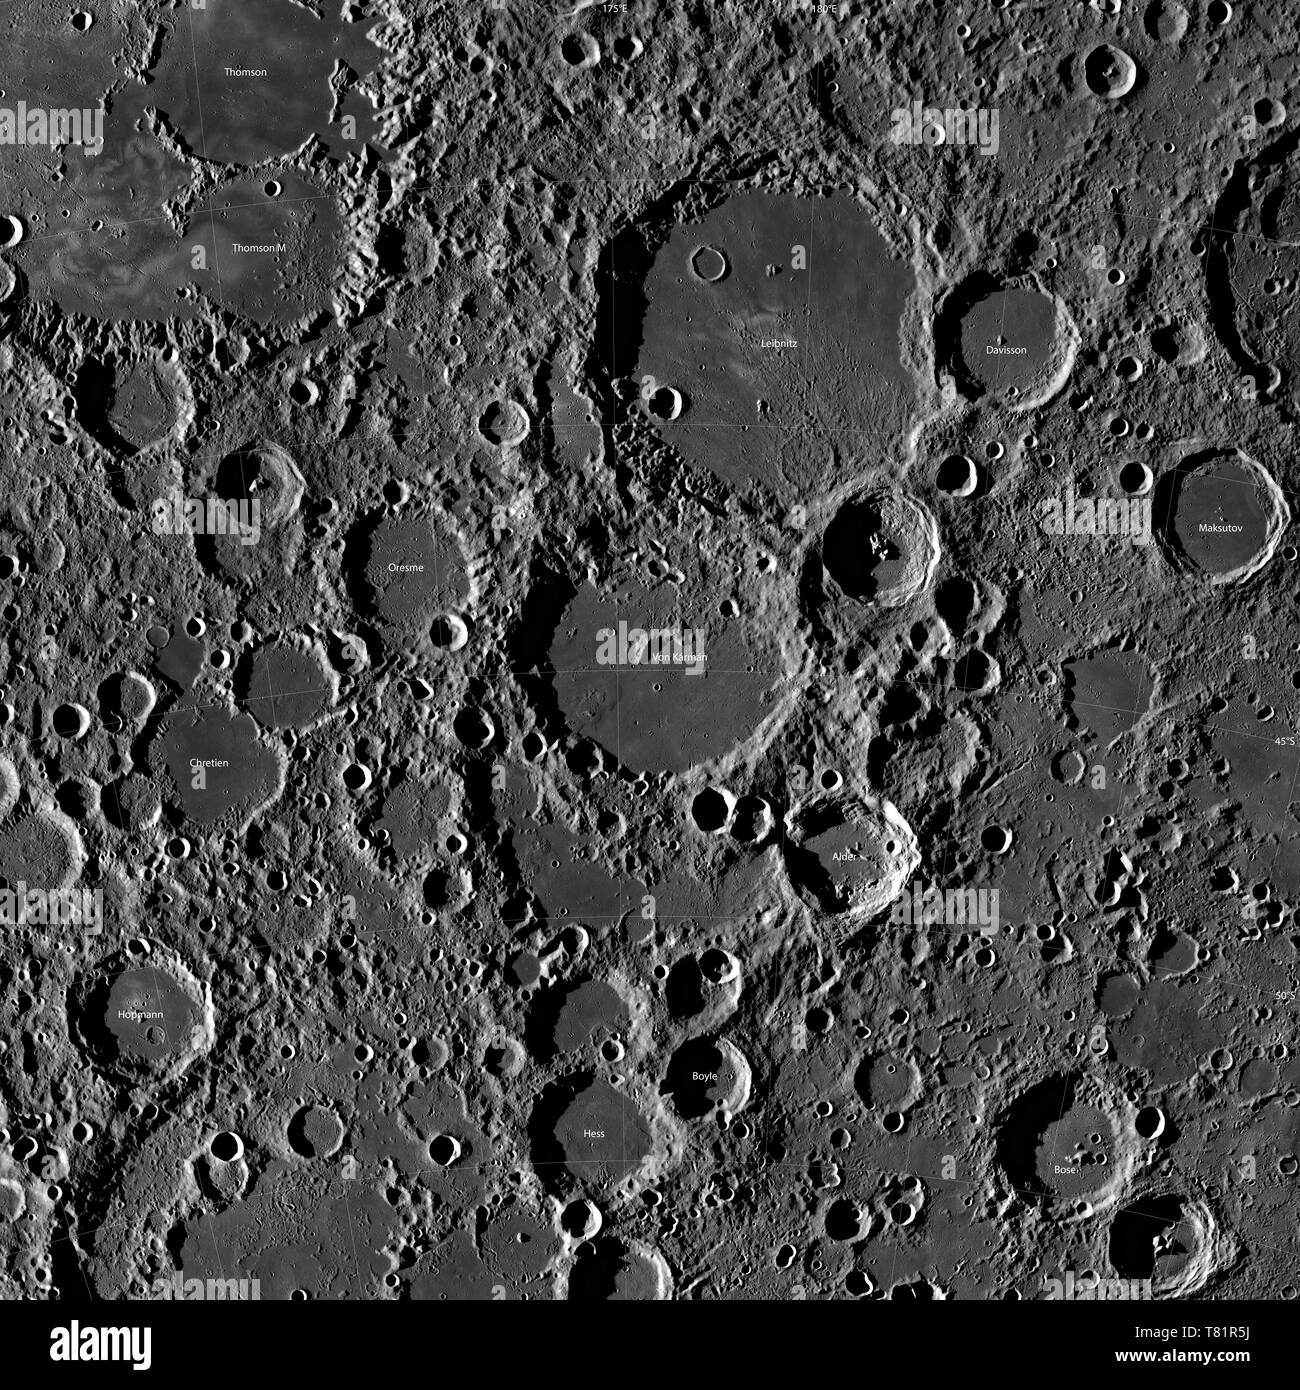 Craters Near Chang'e 4 Landing Site, The Moon Stock Photo